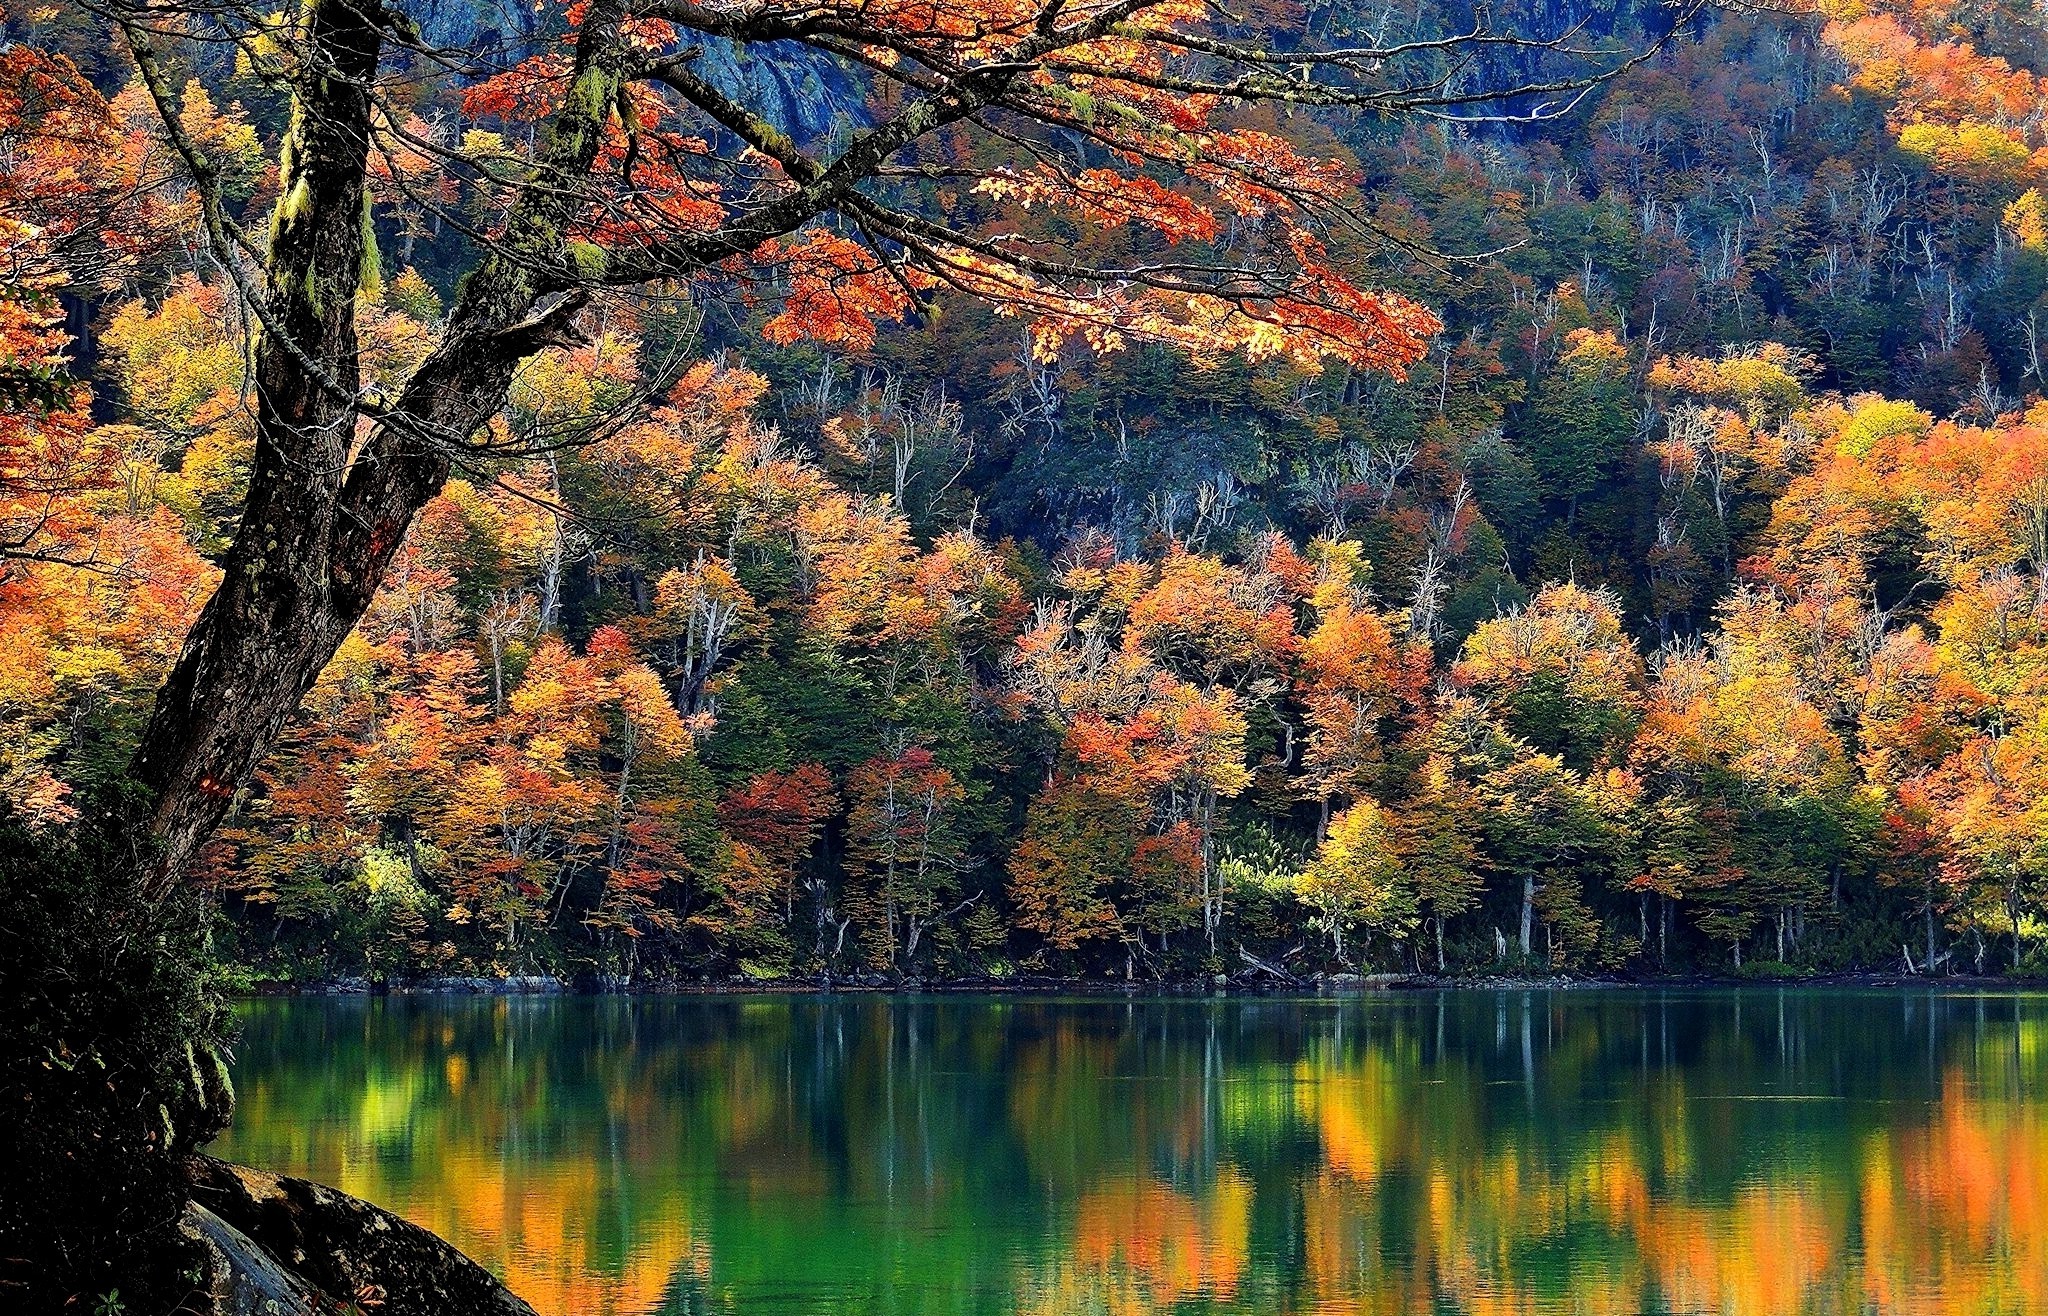 Chile, Lake, Trees, Fall, Mountain, Forest, Water, Nature, Landscape Wallpaper